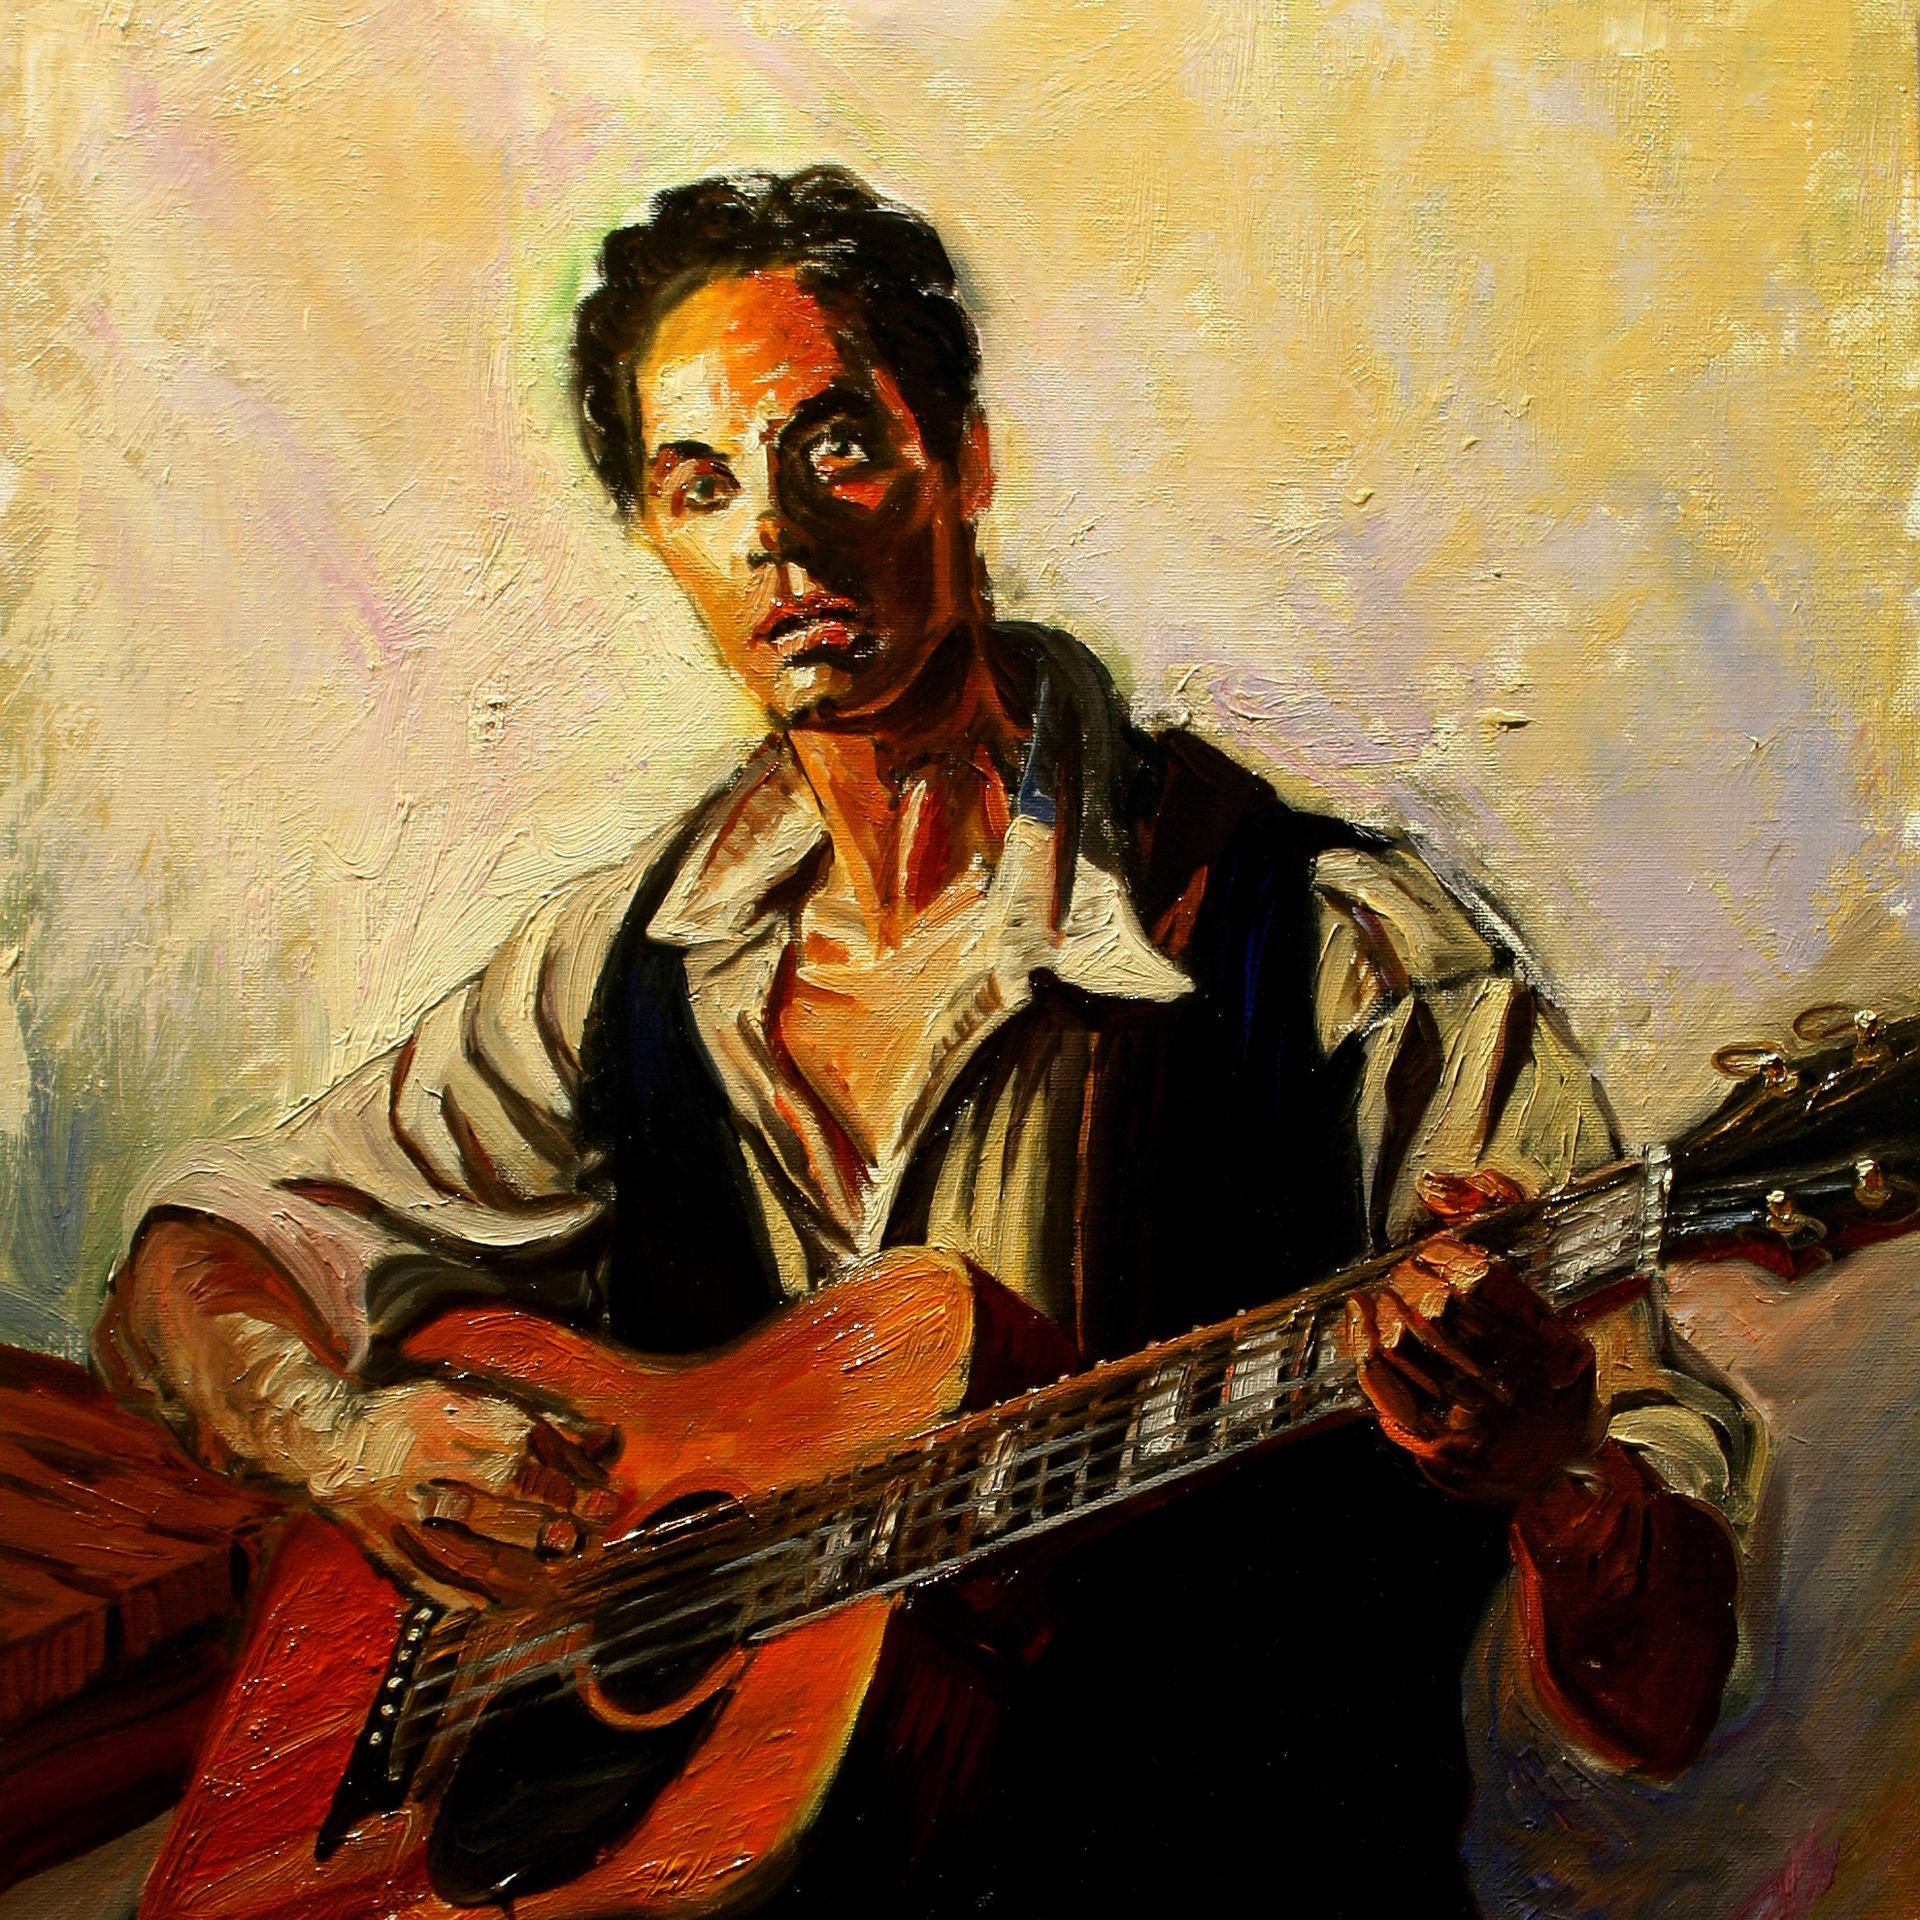 The Folk Singer | Figurative Oil Painting on Canvas